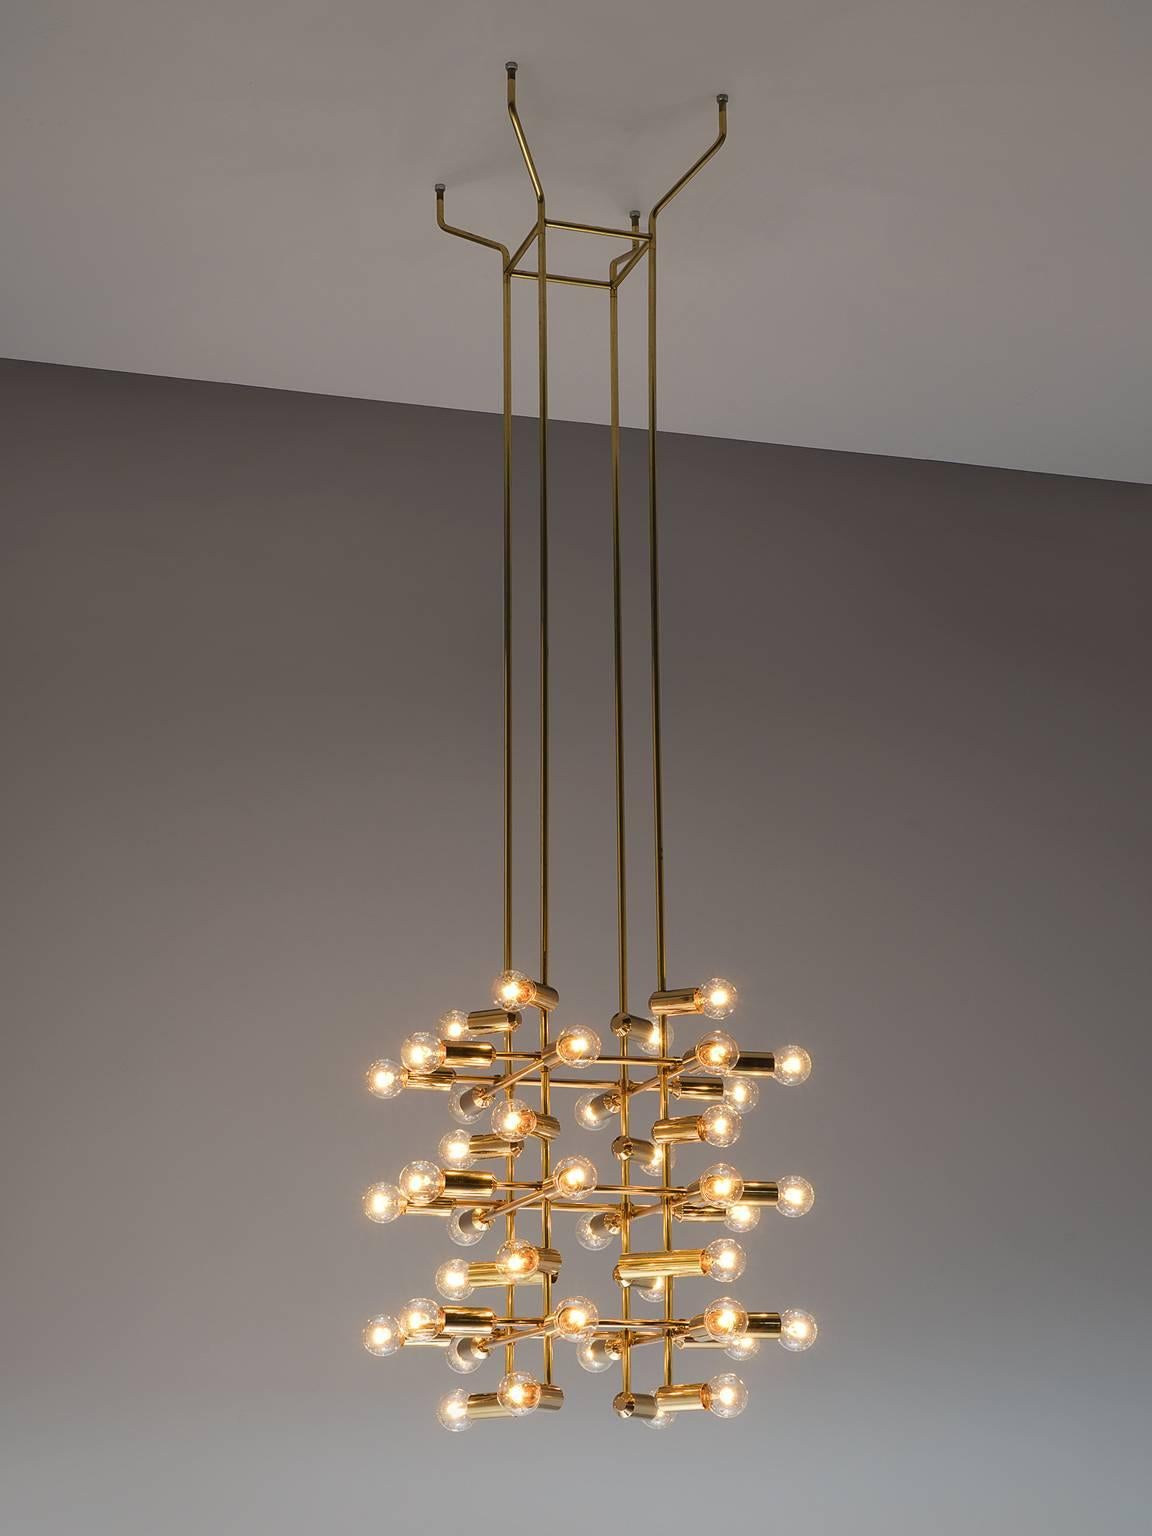 Set of 20 chandeliers in brass, Switzerland, 1960s.

This set of 20 delicate chandeliers are Minimalist yet warm. Each light consists of 40 light bulbs that are placed on the ends of brass horizontal beam. The beams form a cross-like pattern that is